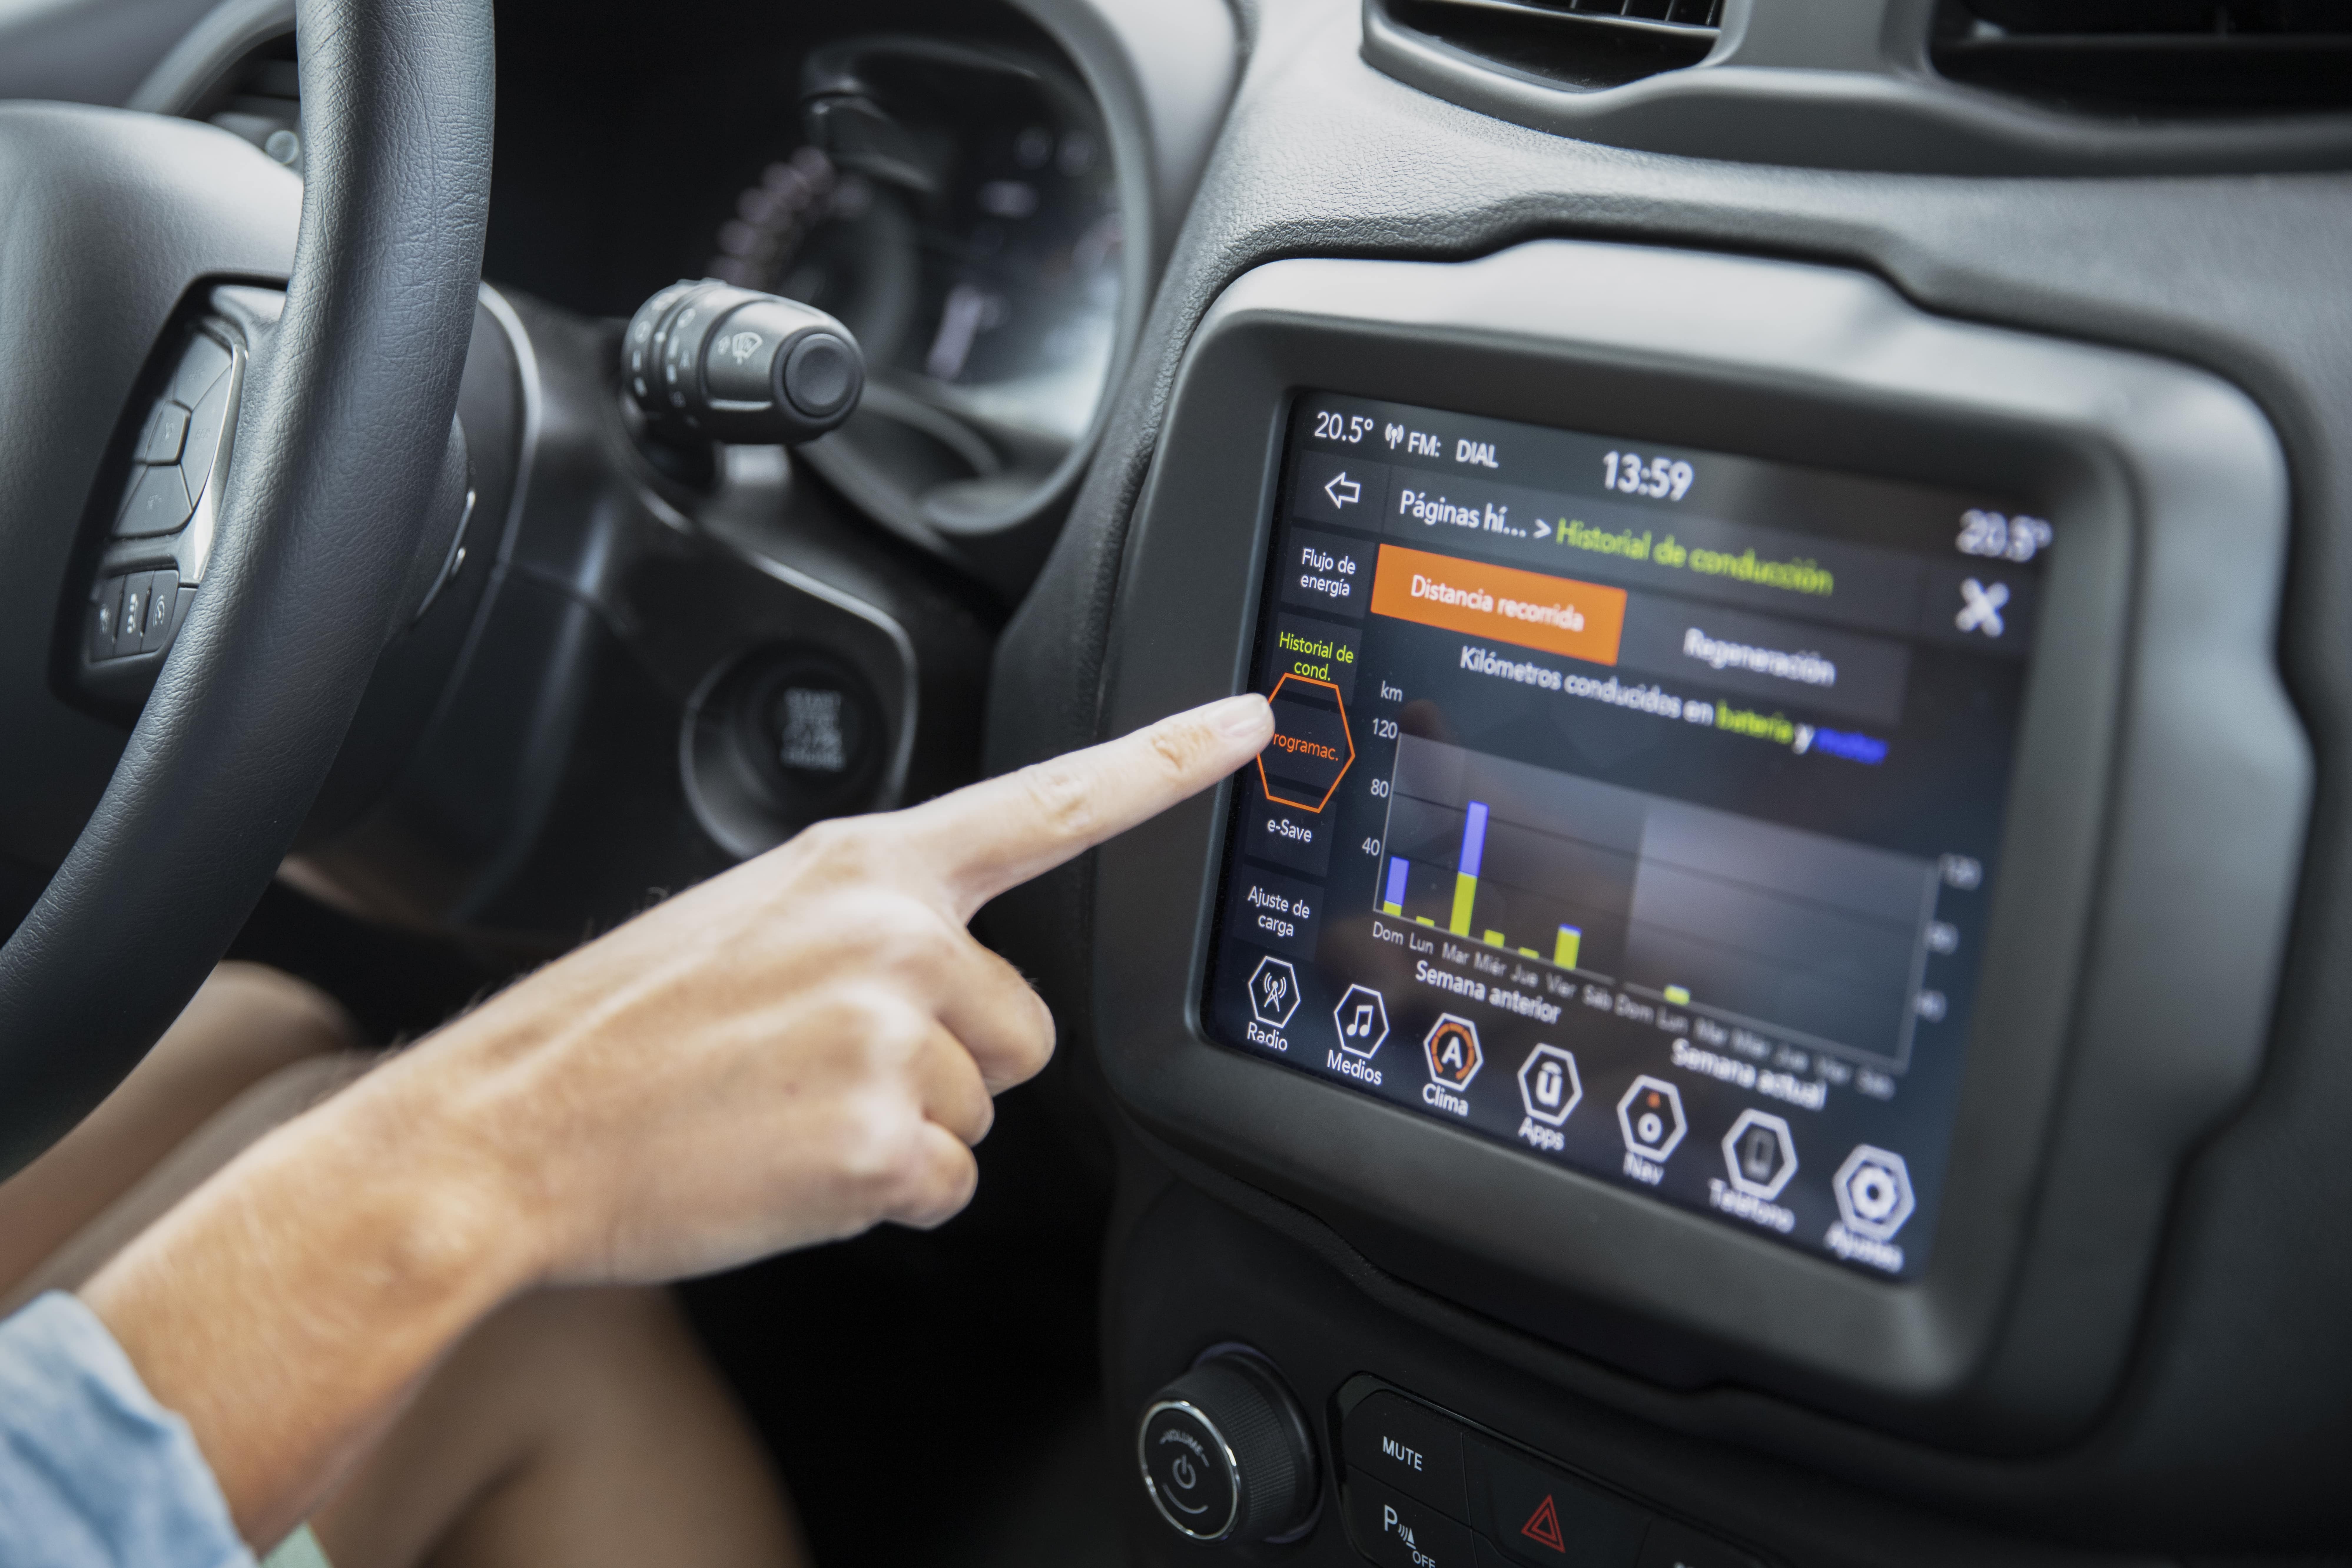 Augmented reality display in cars offers a cutting-edge interface, seamlessly integrating digital information